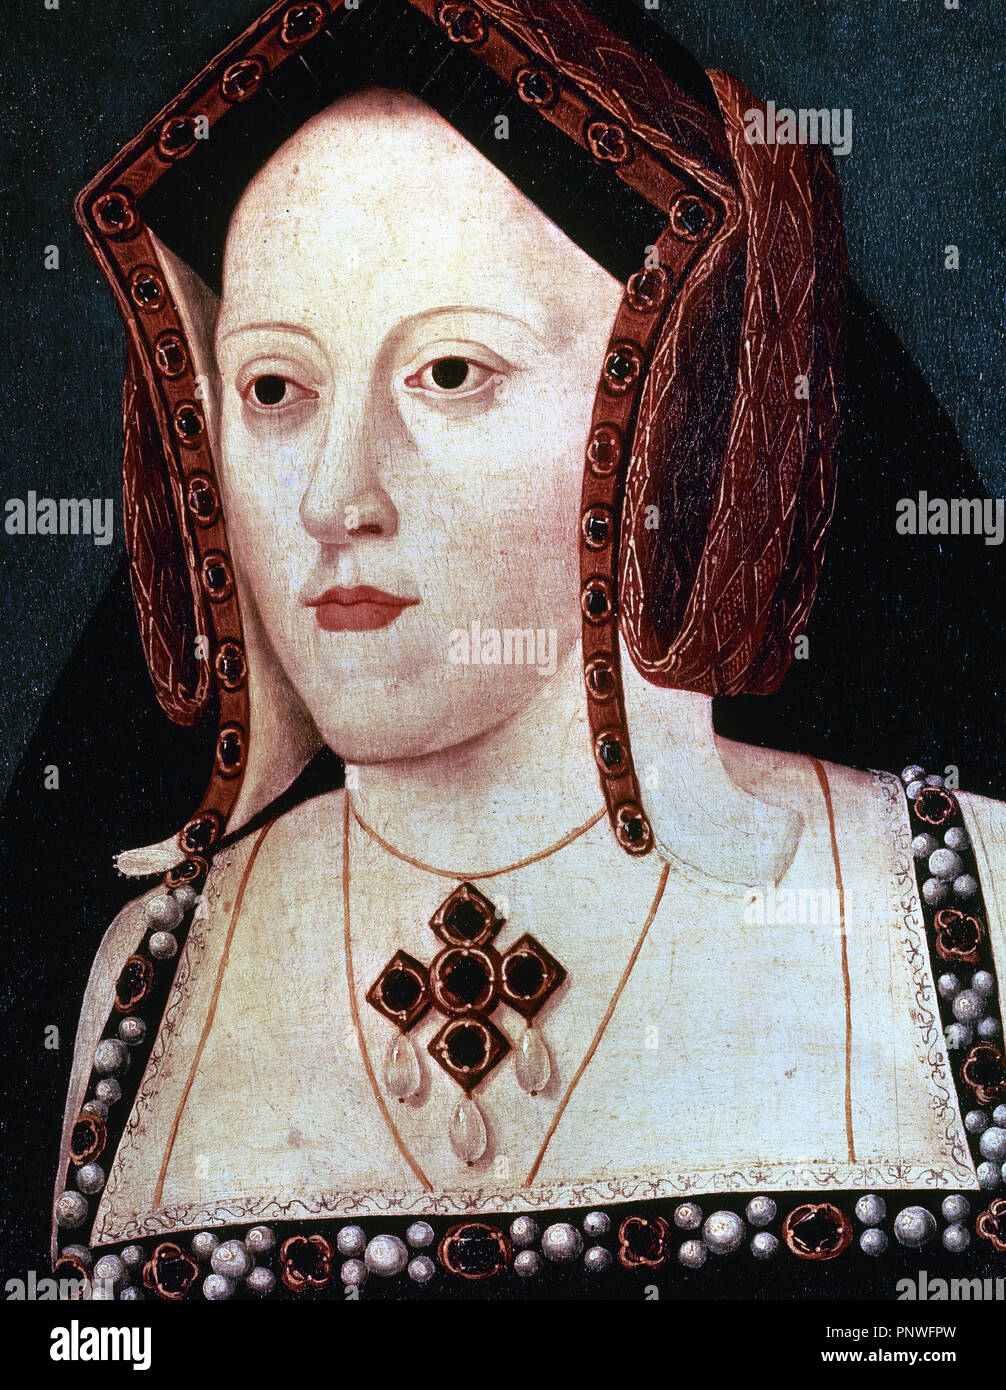 Katherine of Aragon (1485-1536). Queen of England. First wife of Henry VIII. Unknown artist. Early 18th century. National Portrait Gallery. London. United Kingdom. Stock Photo